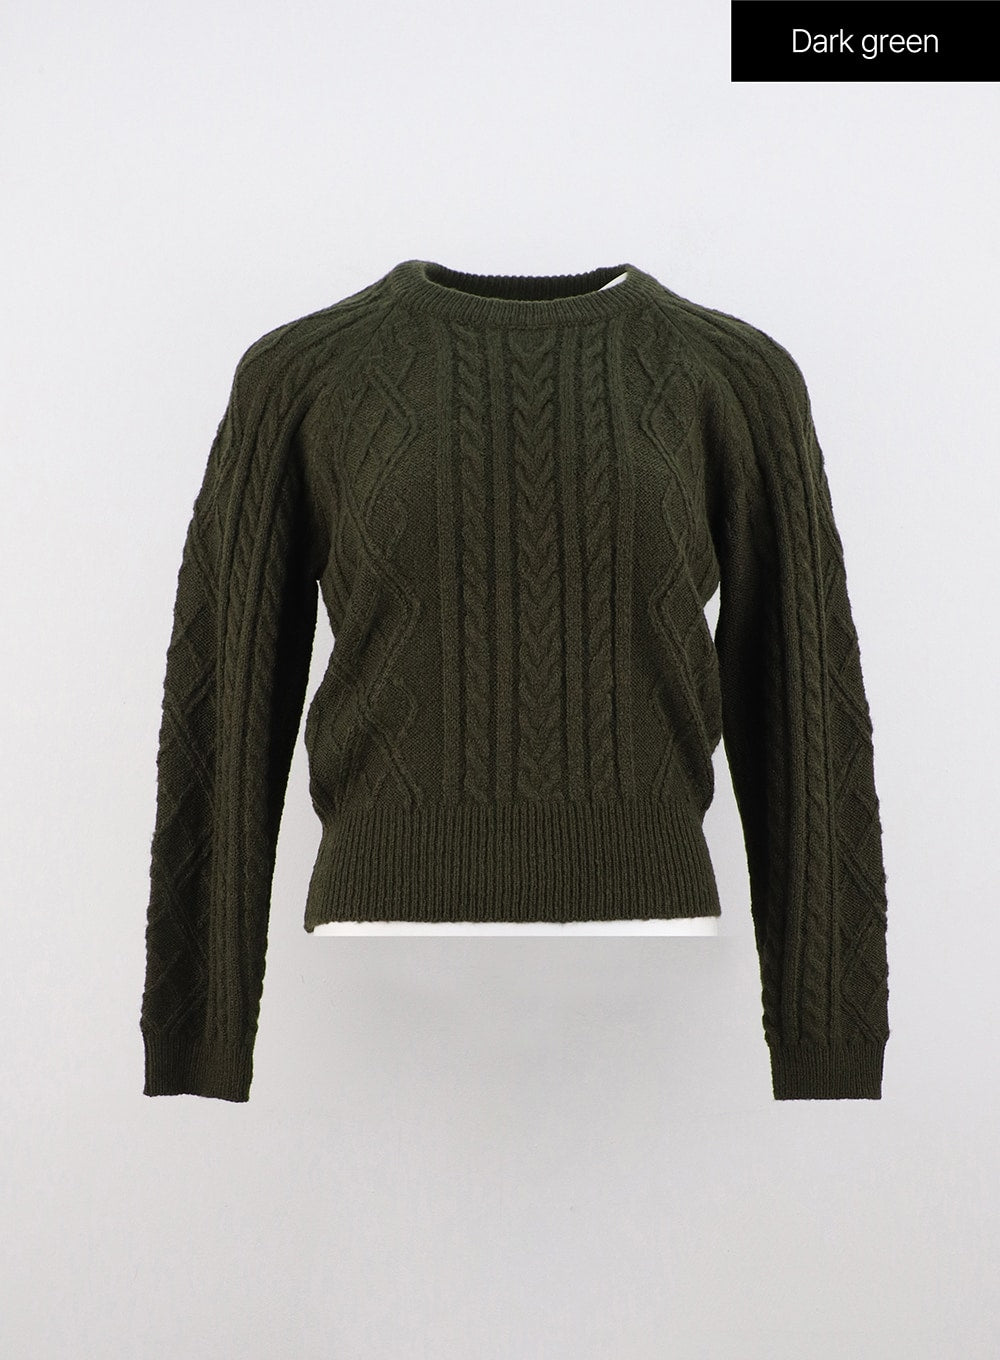 classic-cable-knit-sweater-oo319 / Dark green